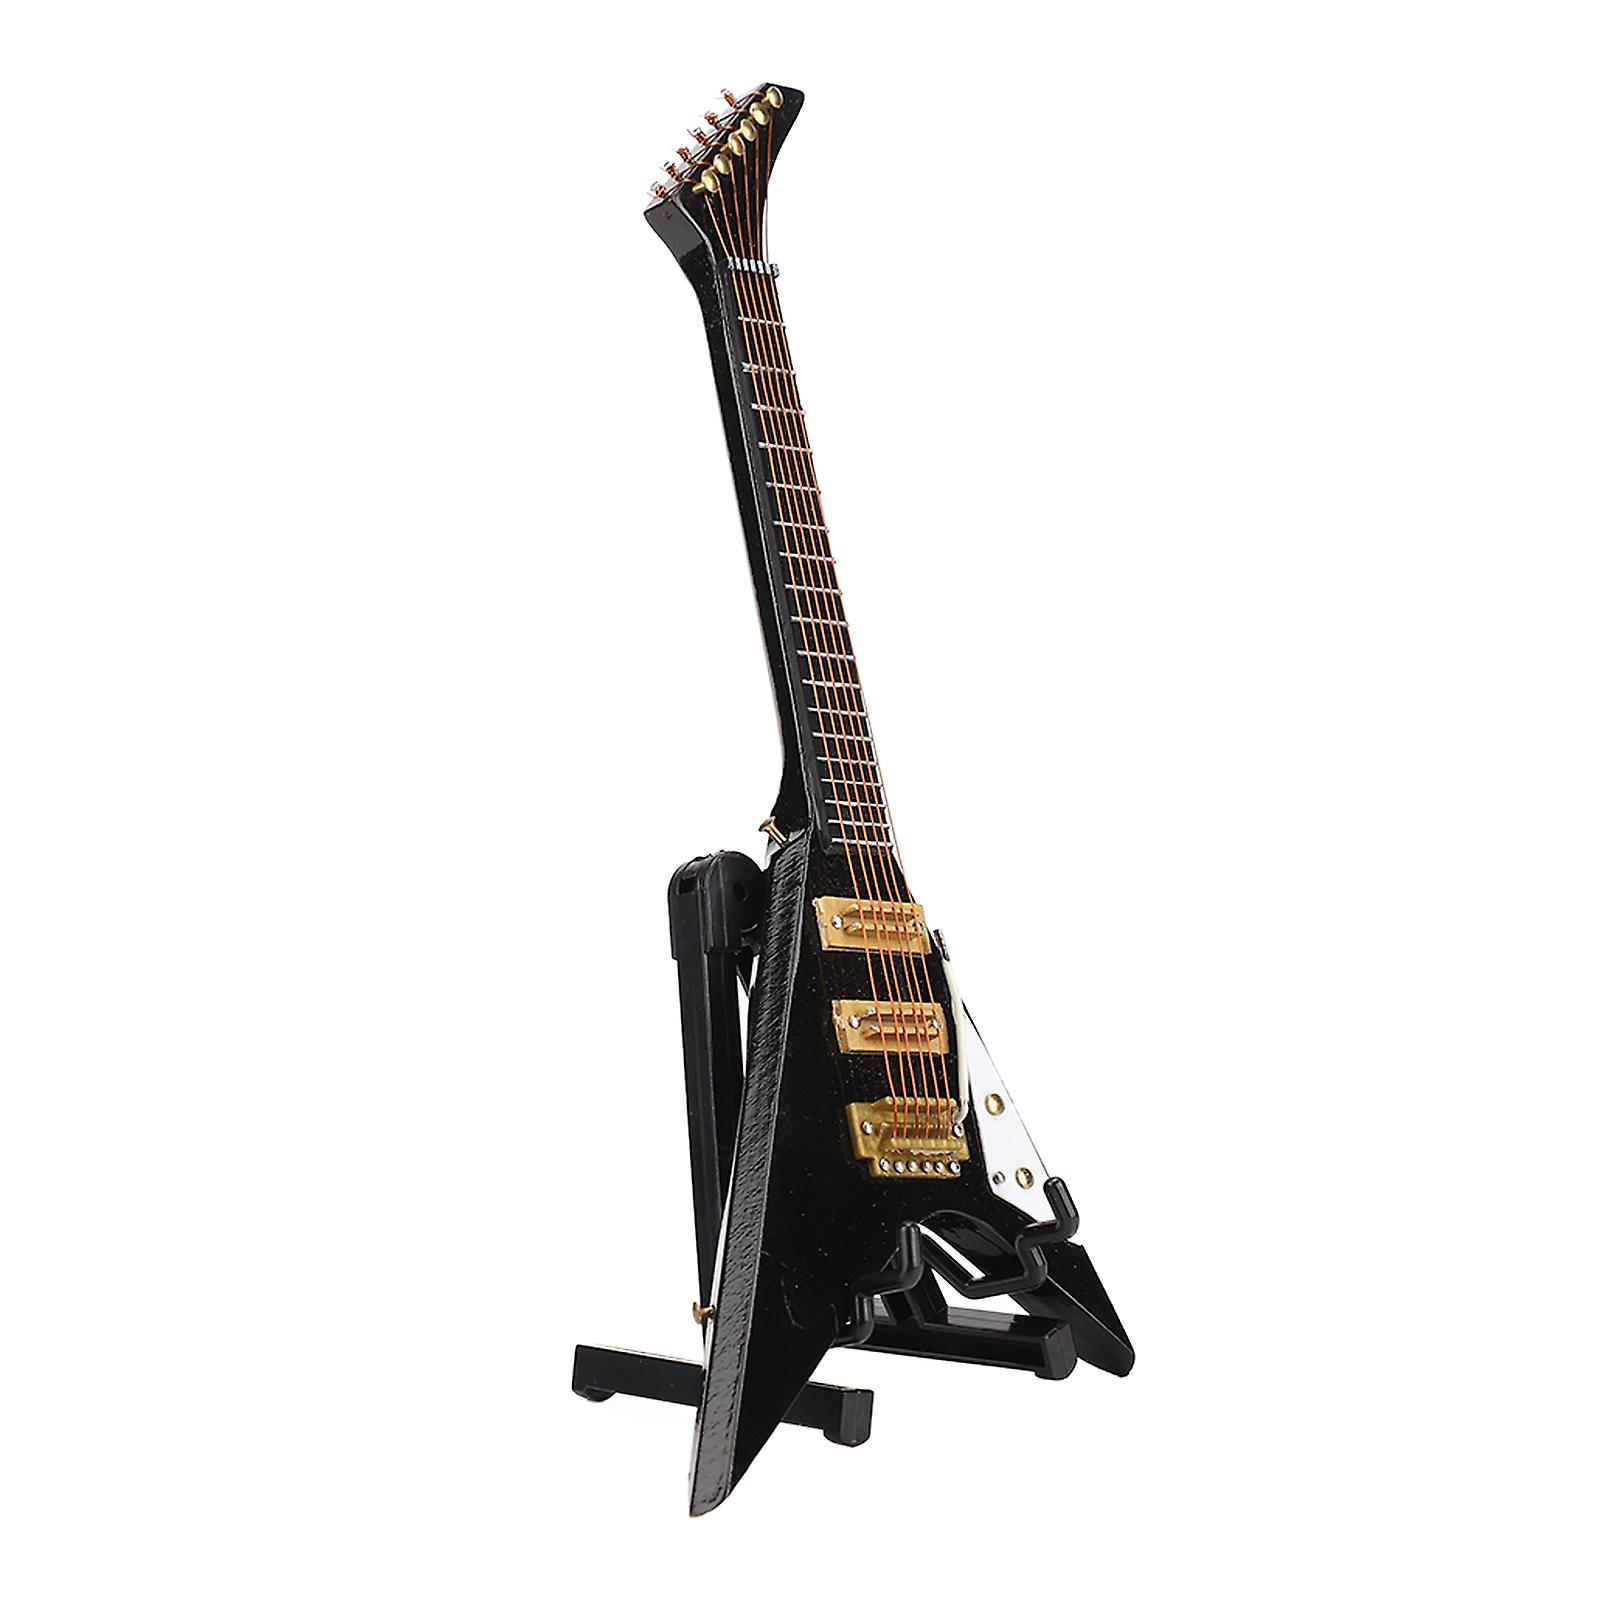 Wooden Miniature Electric Guitar with Stand Black Mini Musical Instrument Dollhouse Model Decoration 7.3in